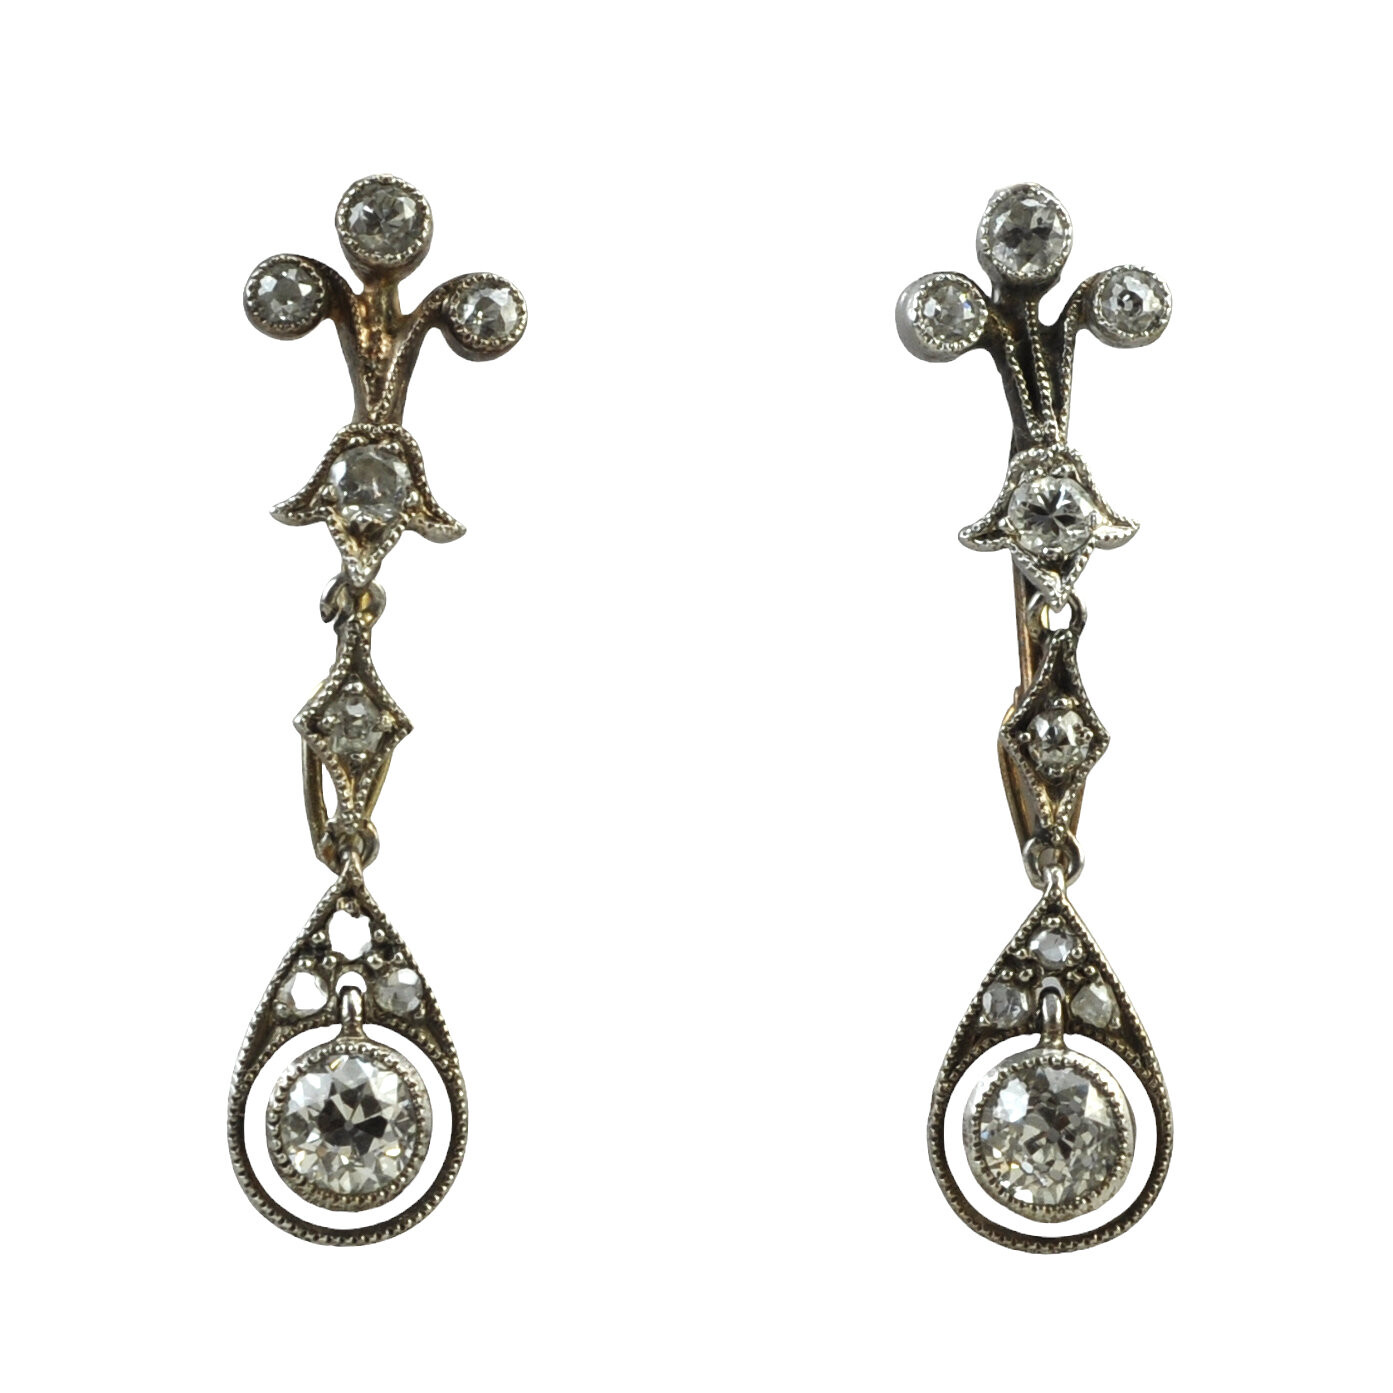 Antique diamond drop earrings - RESERVED